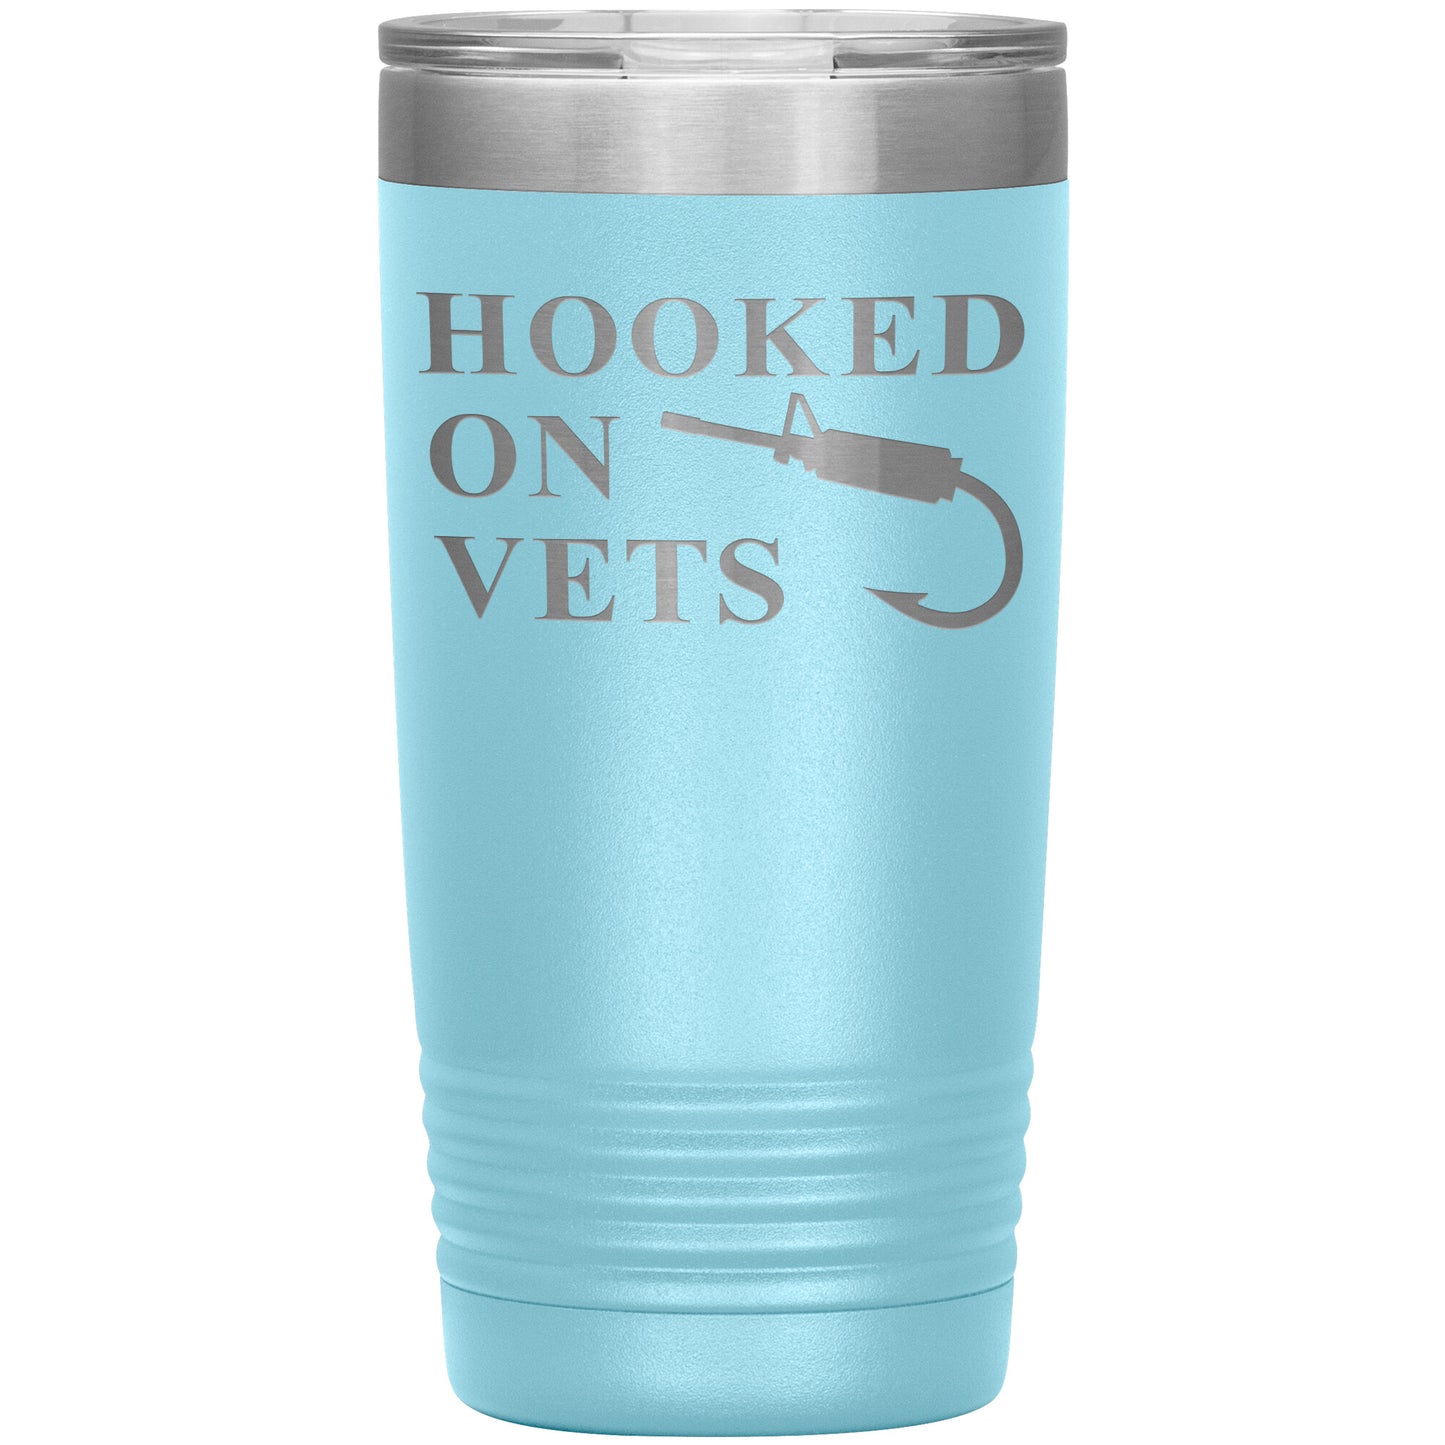 HOOKED ON VETS - 20oz Insulated Tumbler